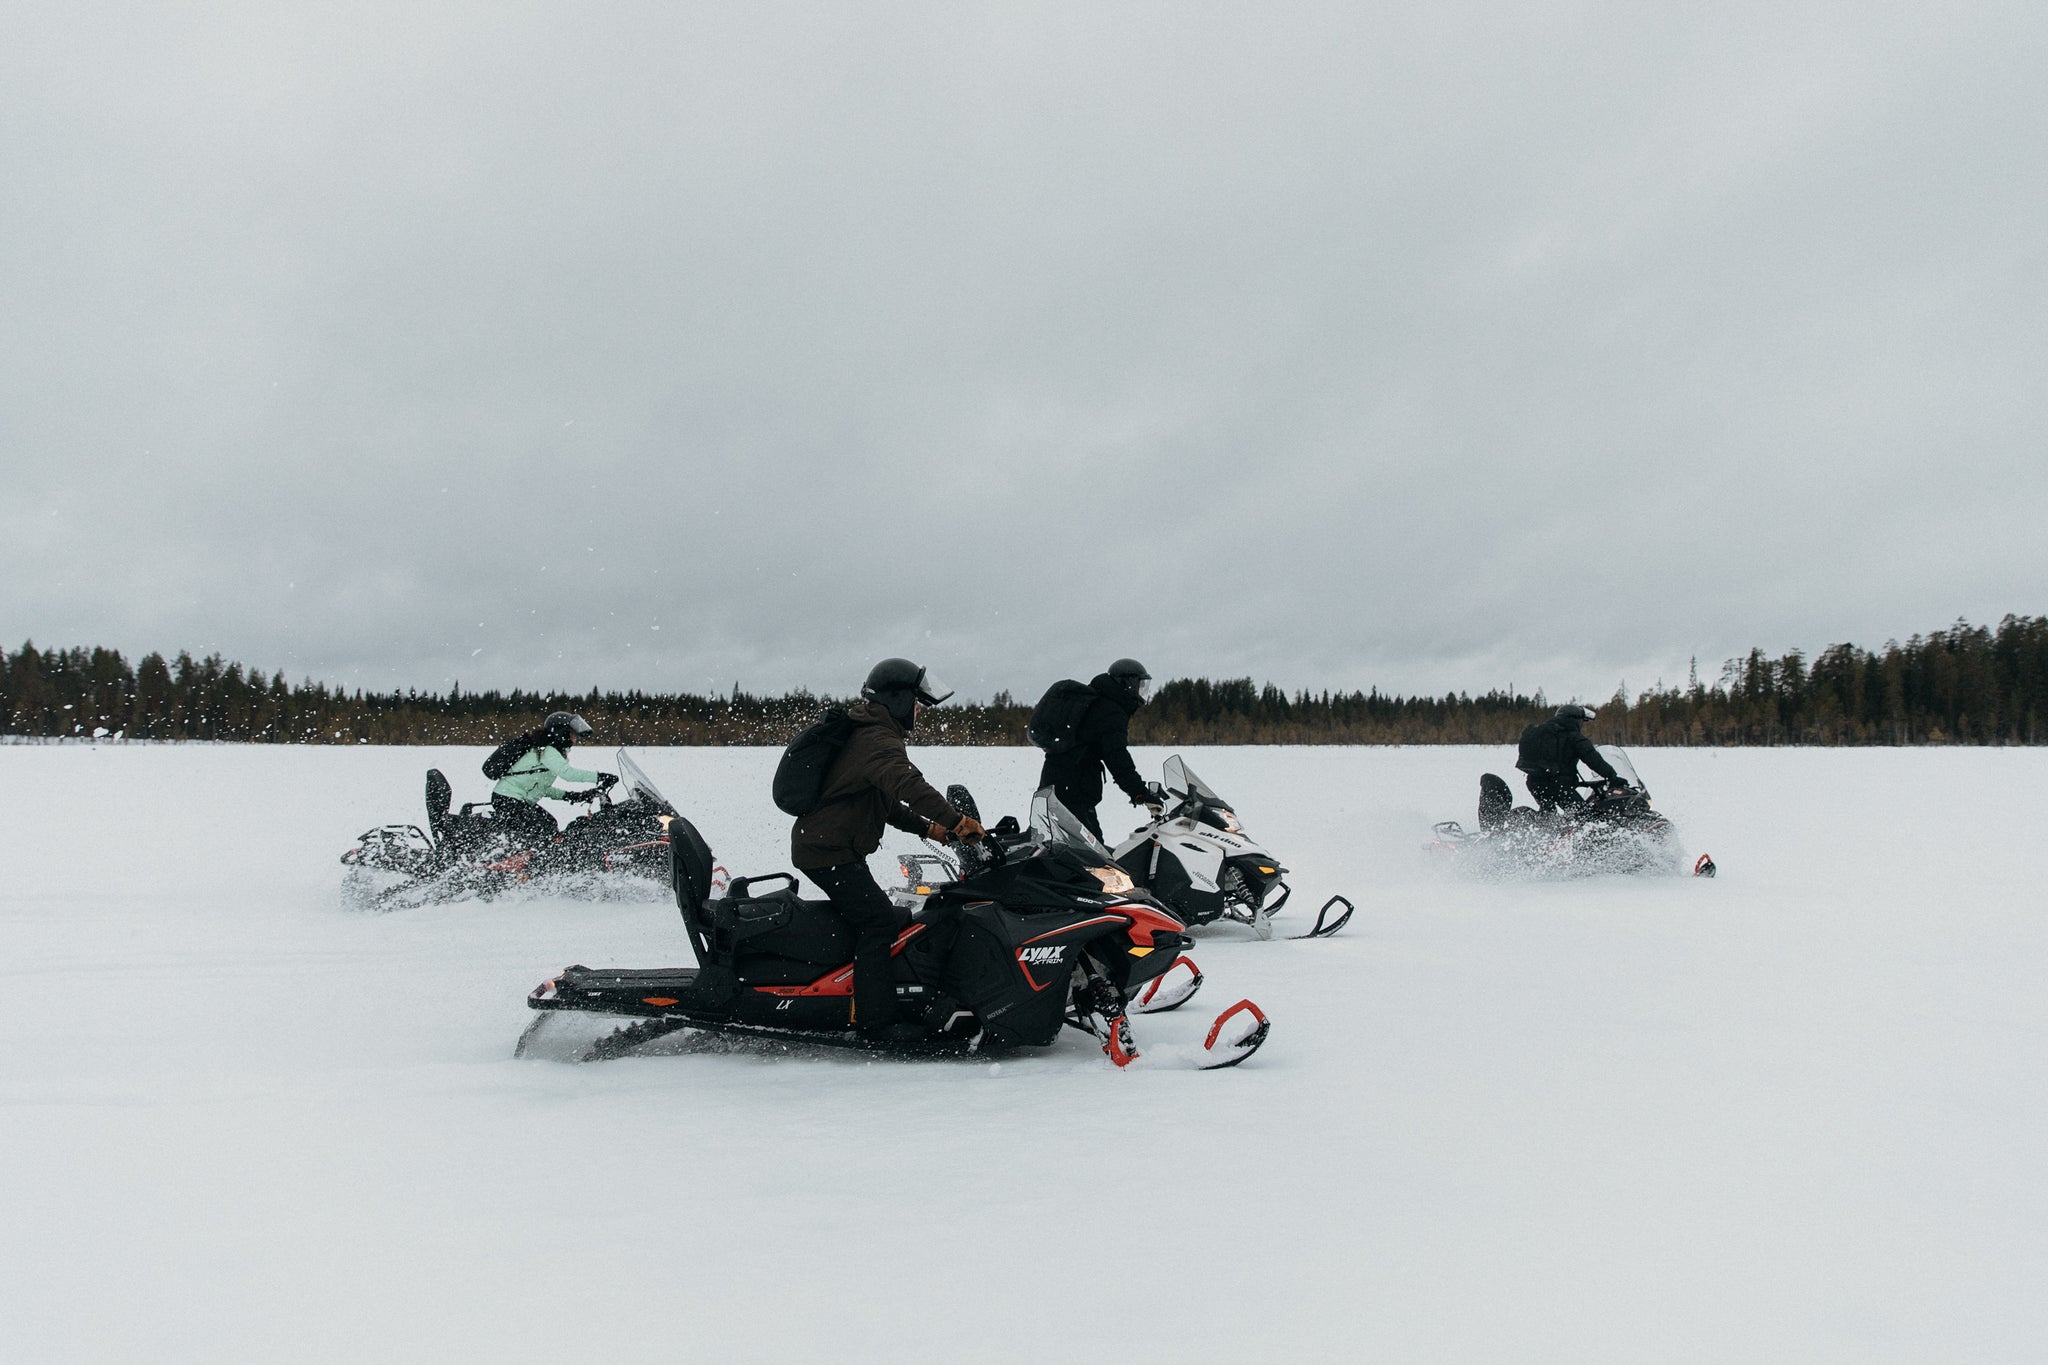 A group of 4 people driving on snowmobiles in the snow wearing black backpacks and rucksacks